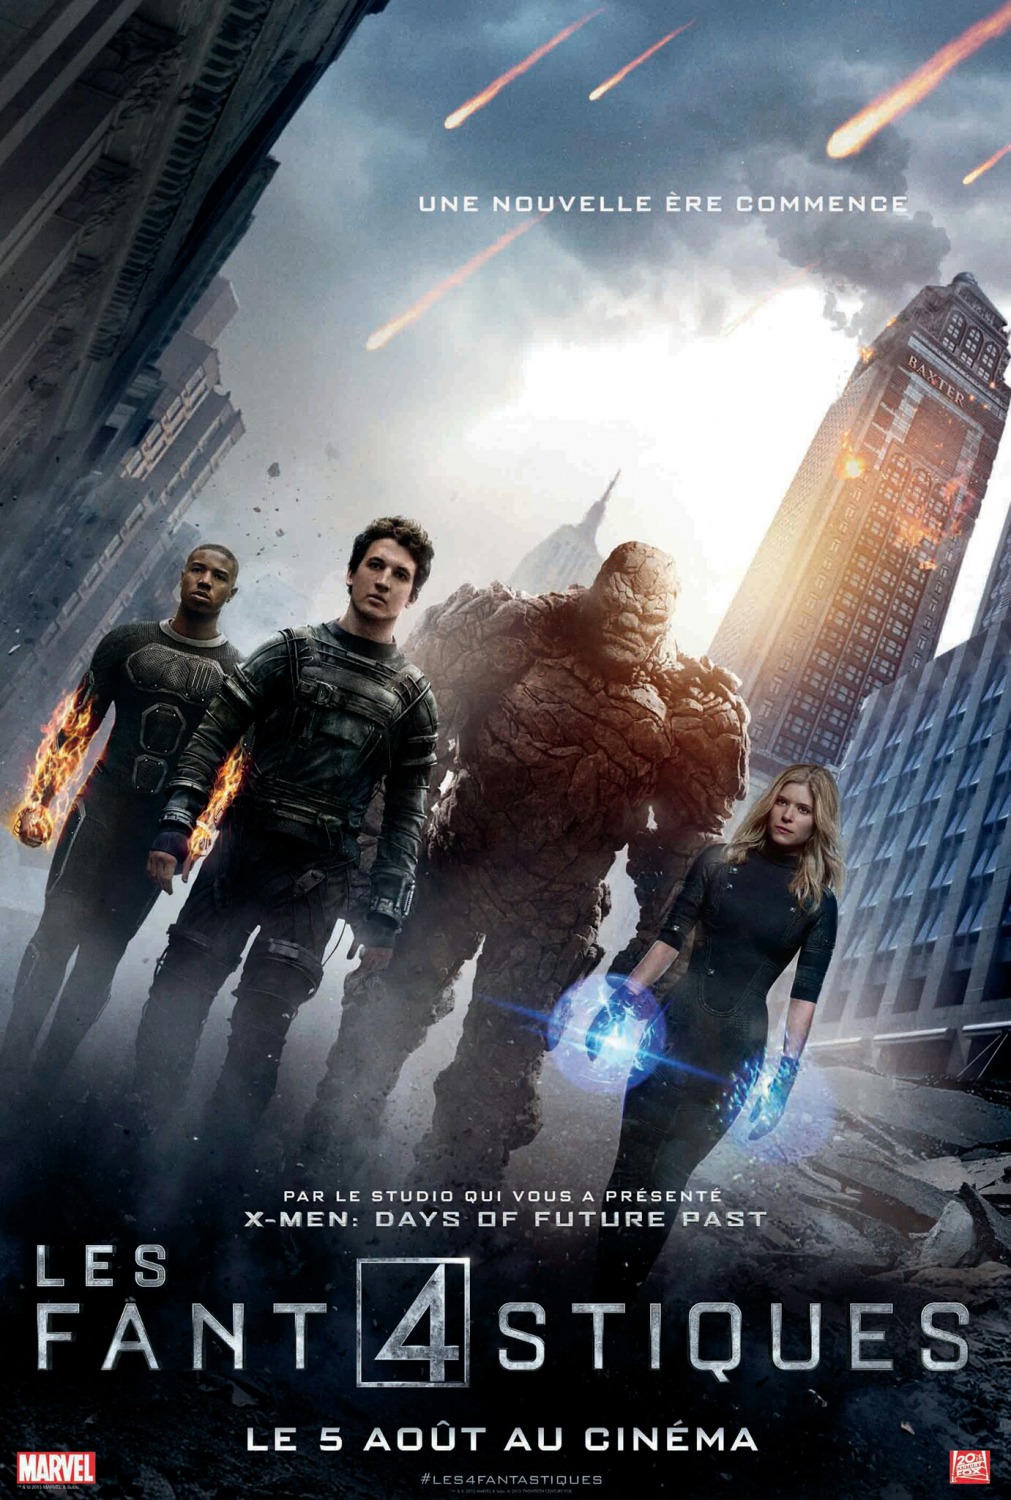 Extra Large Movie Poster Image for The Fantastic Four (#11 of 11)